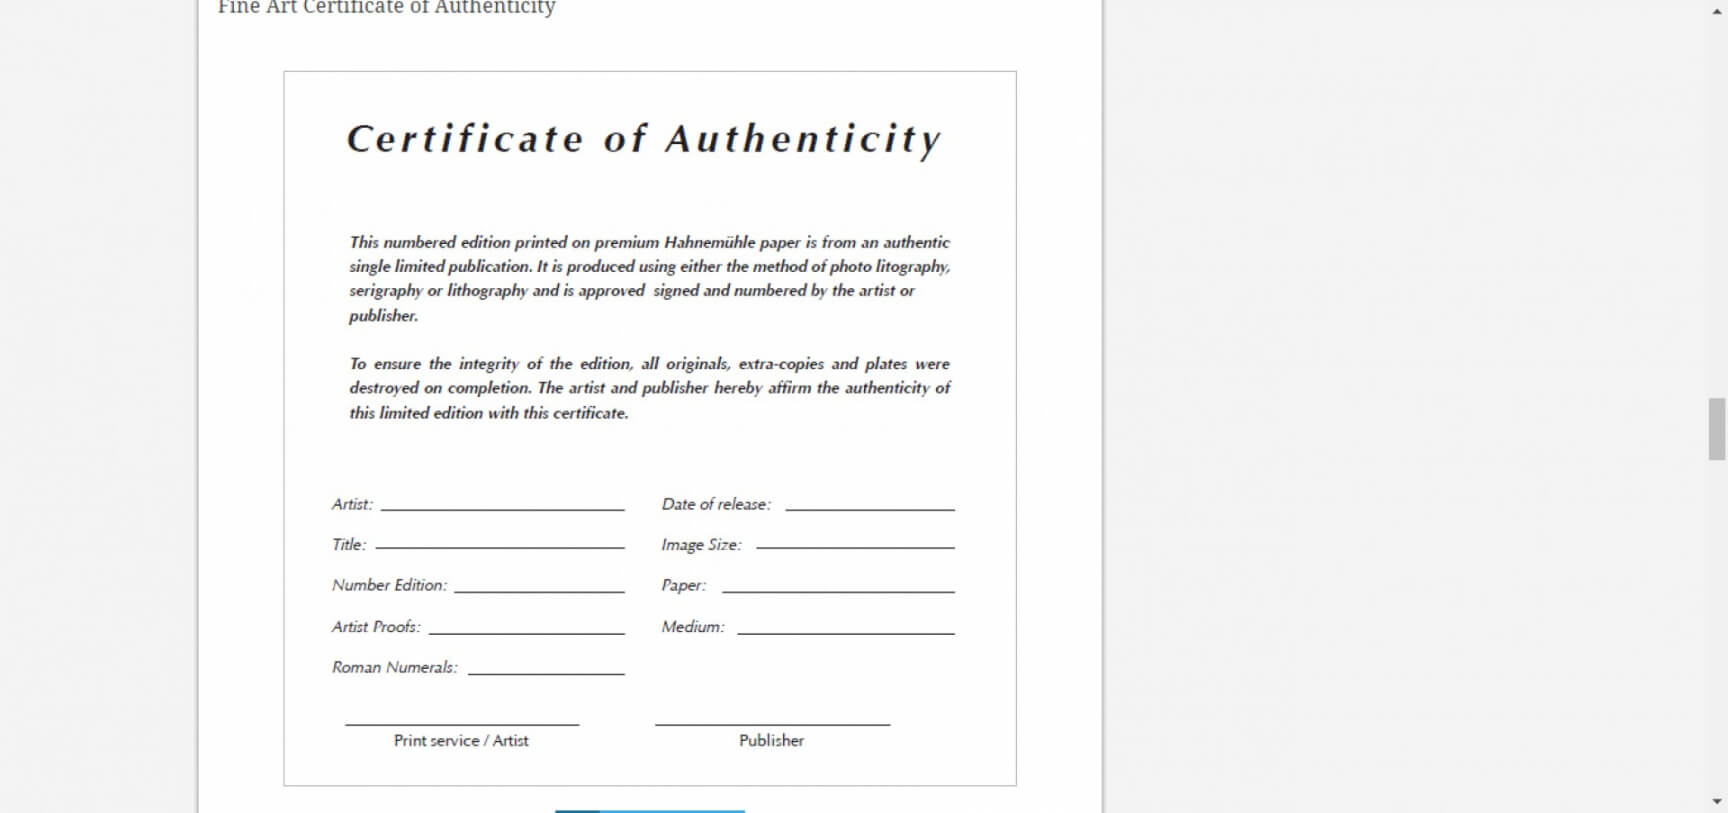 Certificate Of Authenticity Artwork Template | Emetonlineblog With Certificate Of Disposal Template